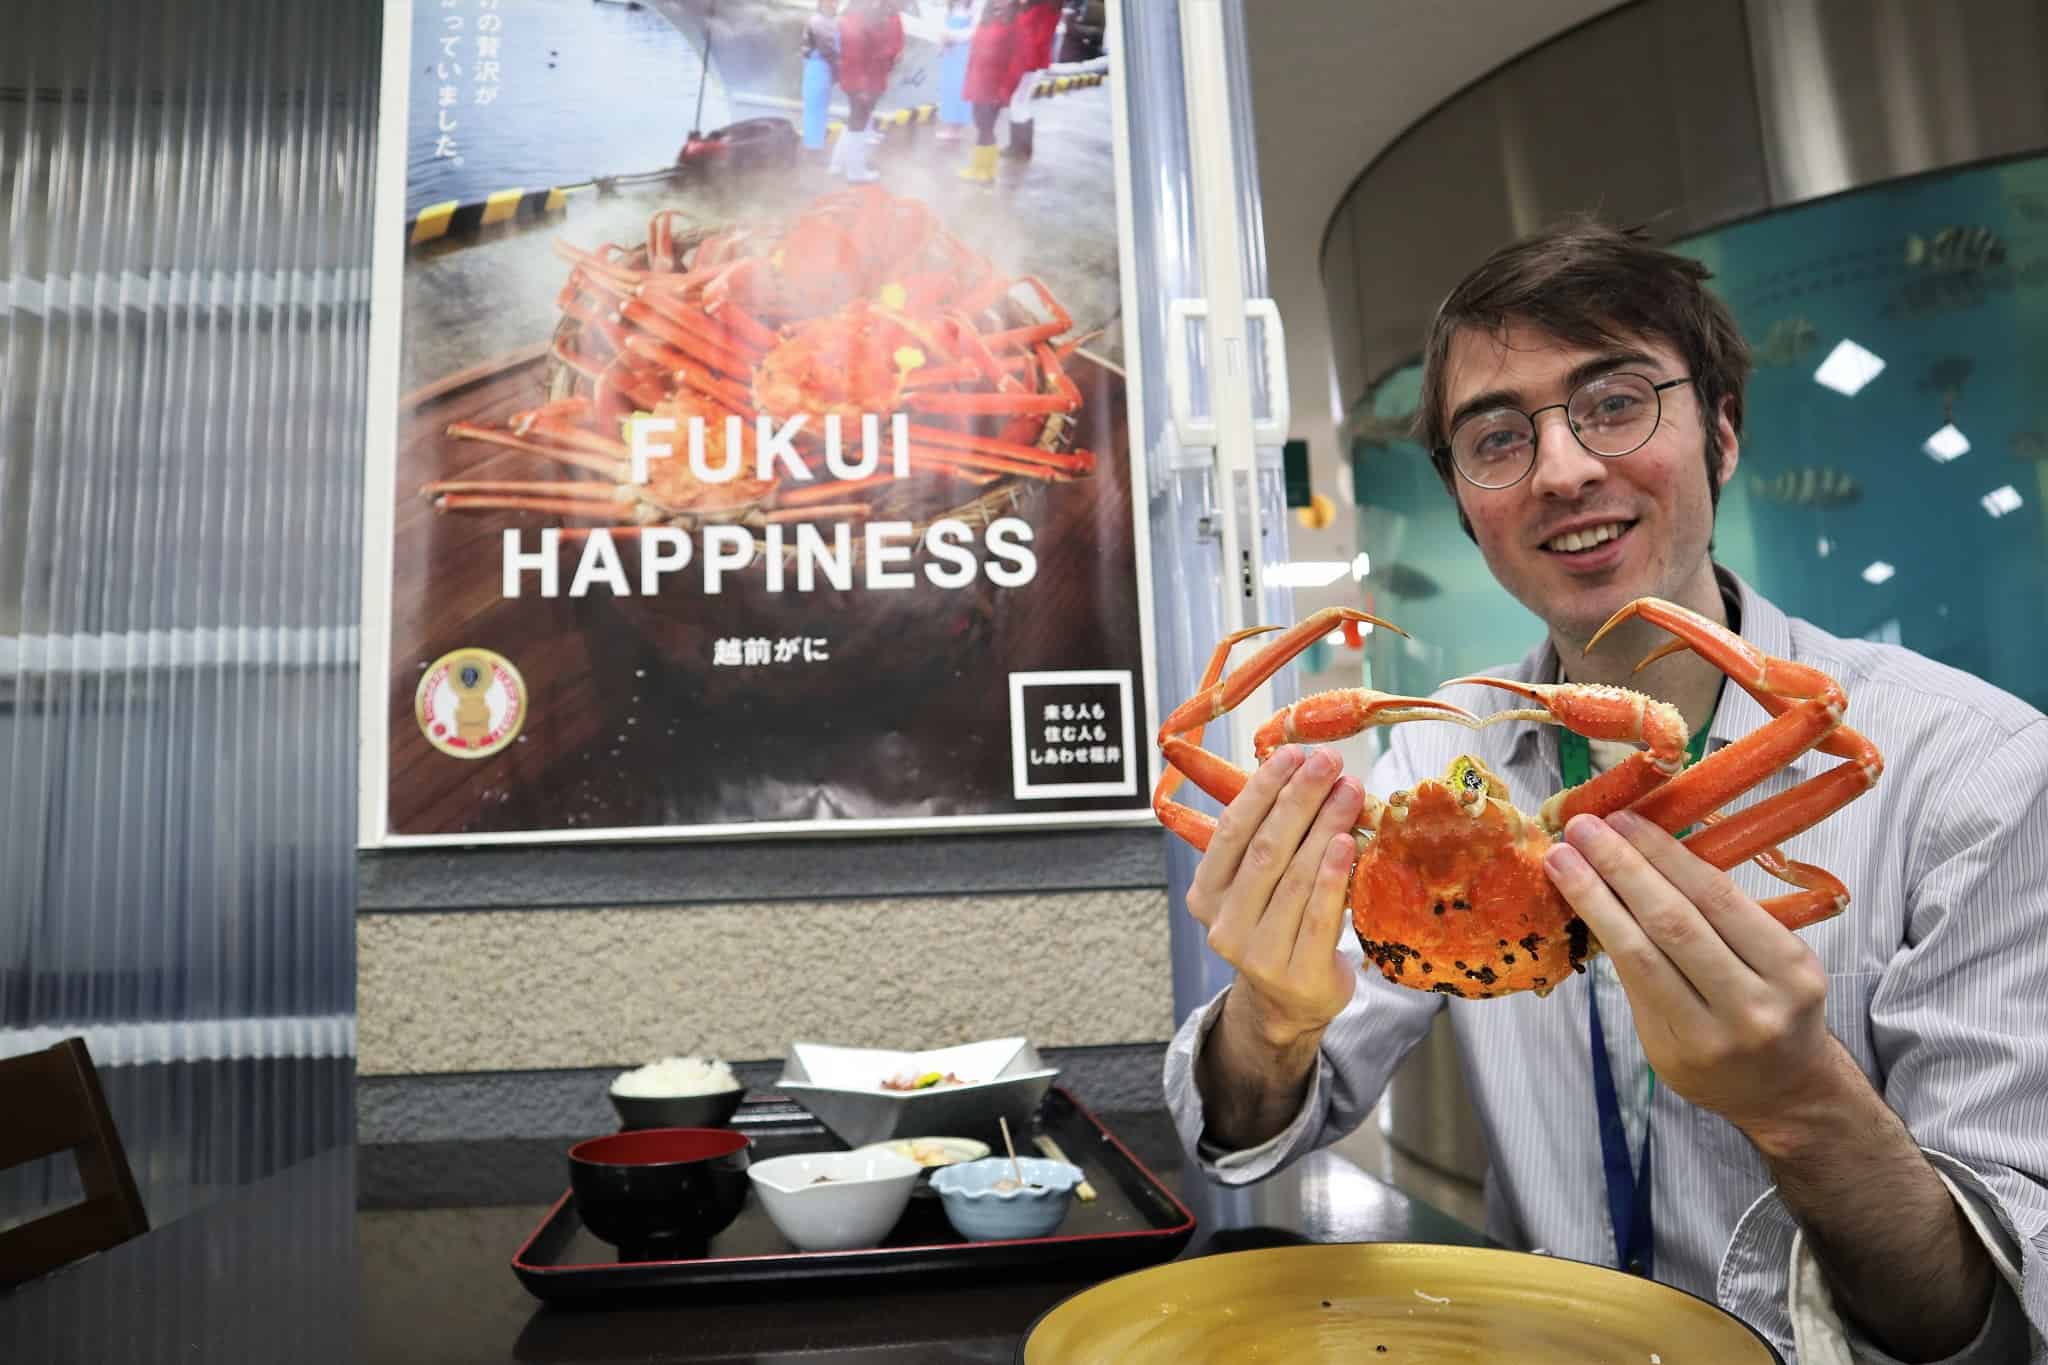 Best things to do in Fukui Japan - Pierre - Eating an Echizen Gani snow crab on the Echizen Coast